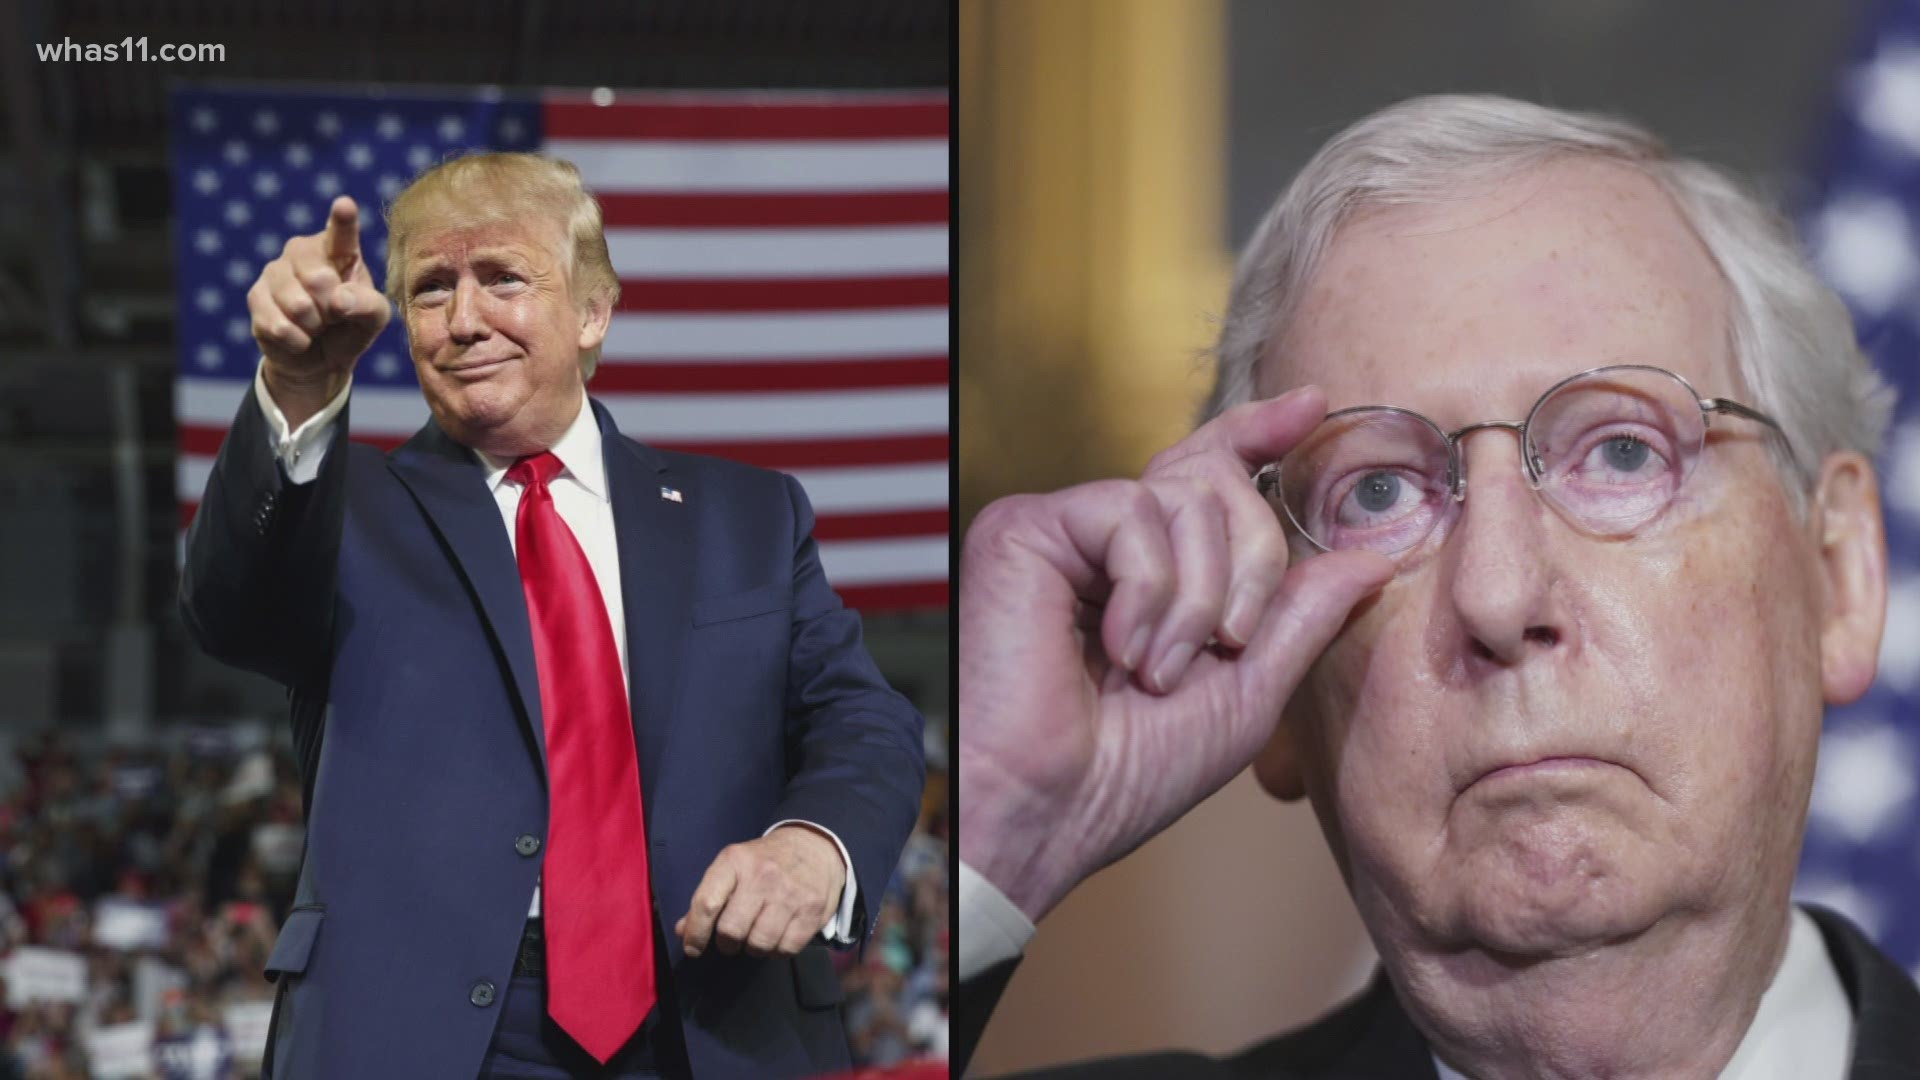 Former President Donald Trump is lashing out at Mitch McConnell, days after the Senate Republican leader called Trump “morally responsible” for the Jan. 6 attack